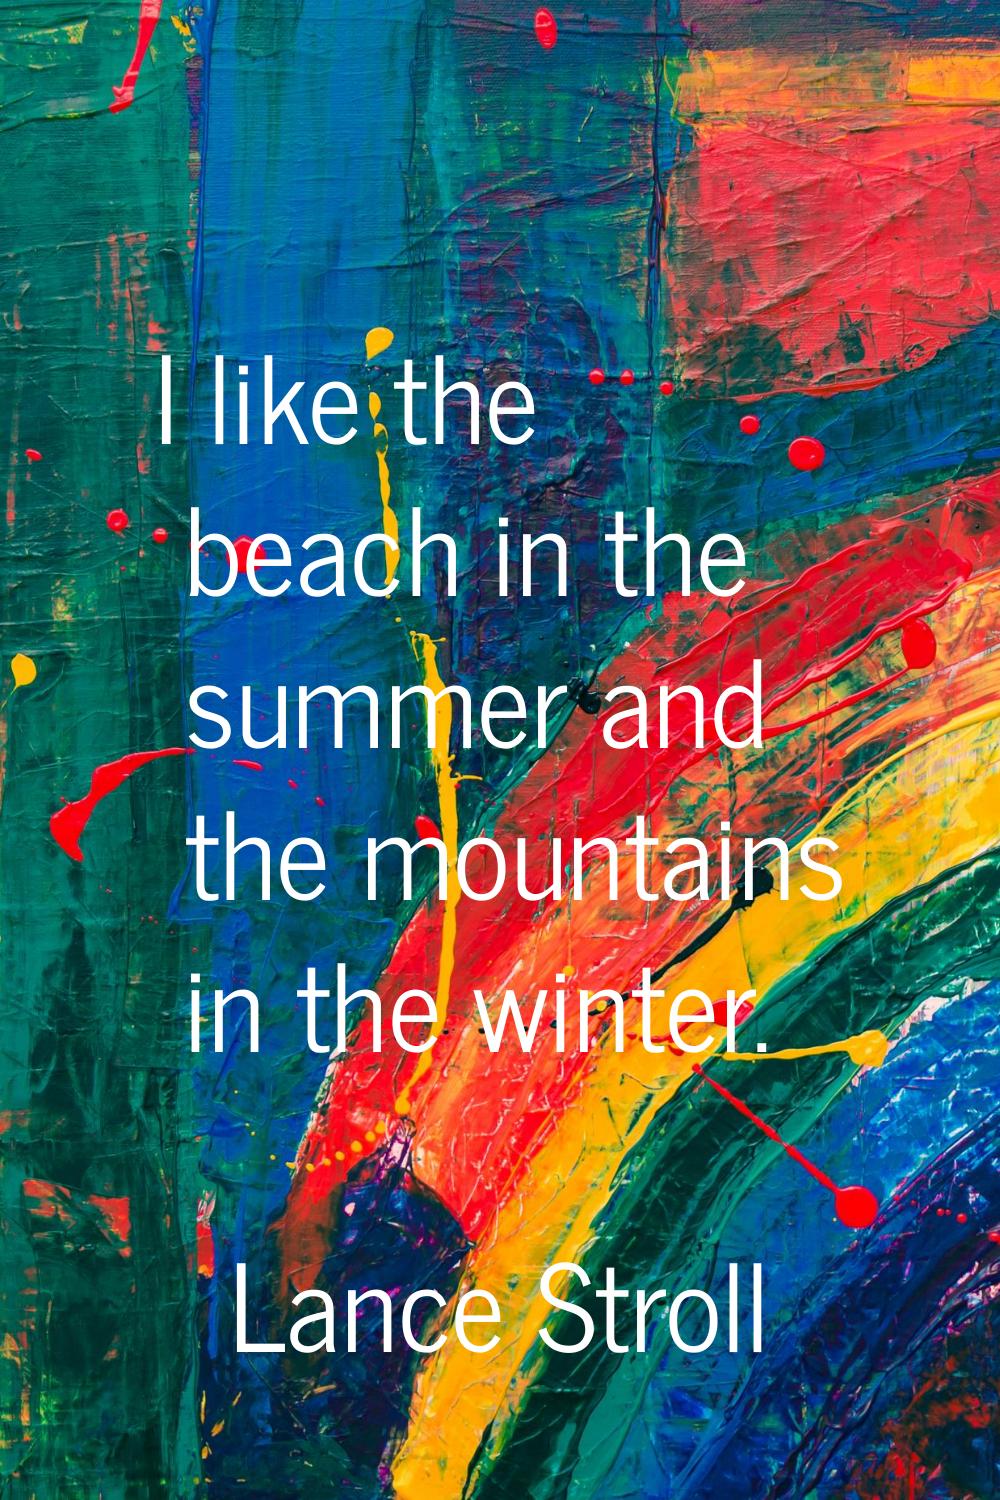 I like the beach in the summer and the mountains in the winter.